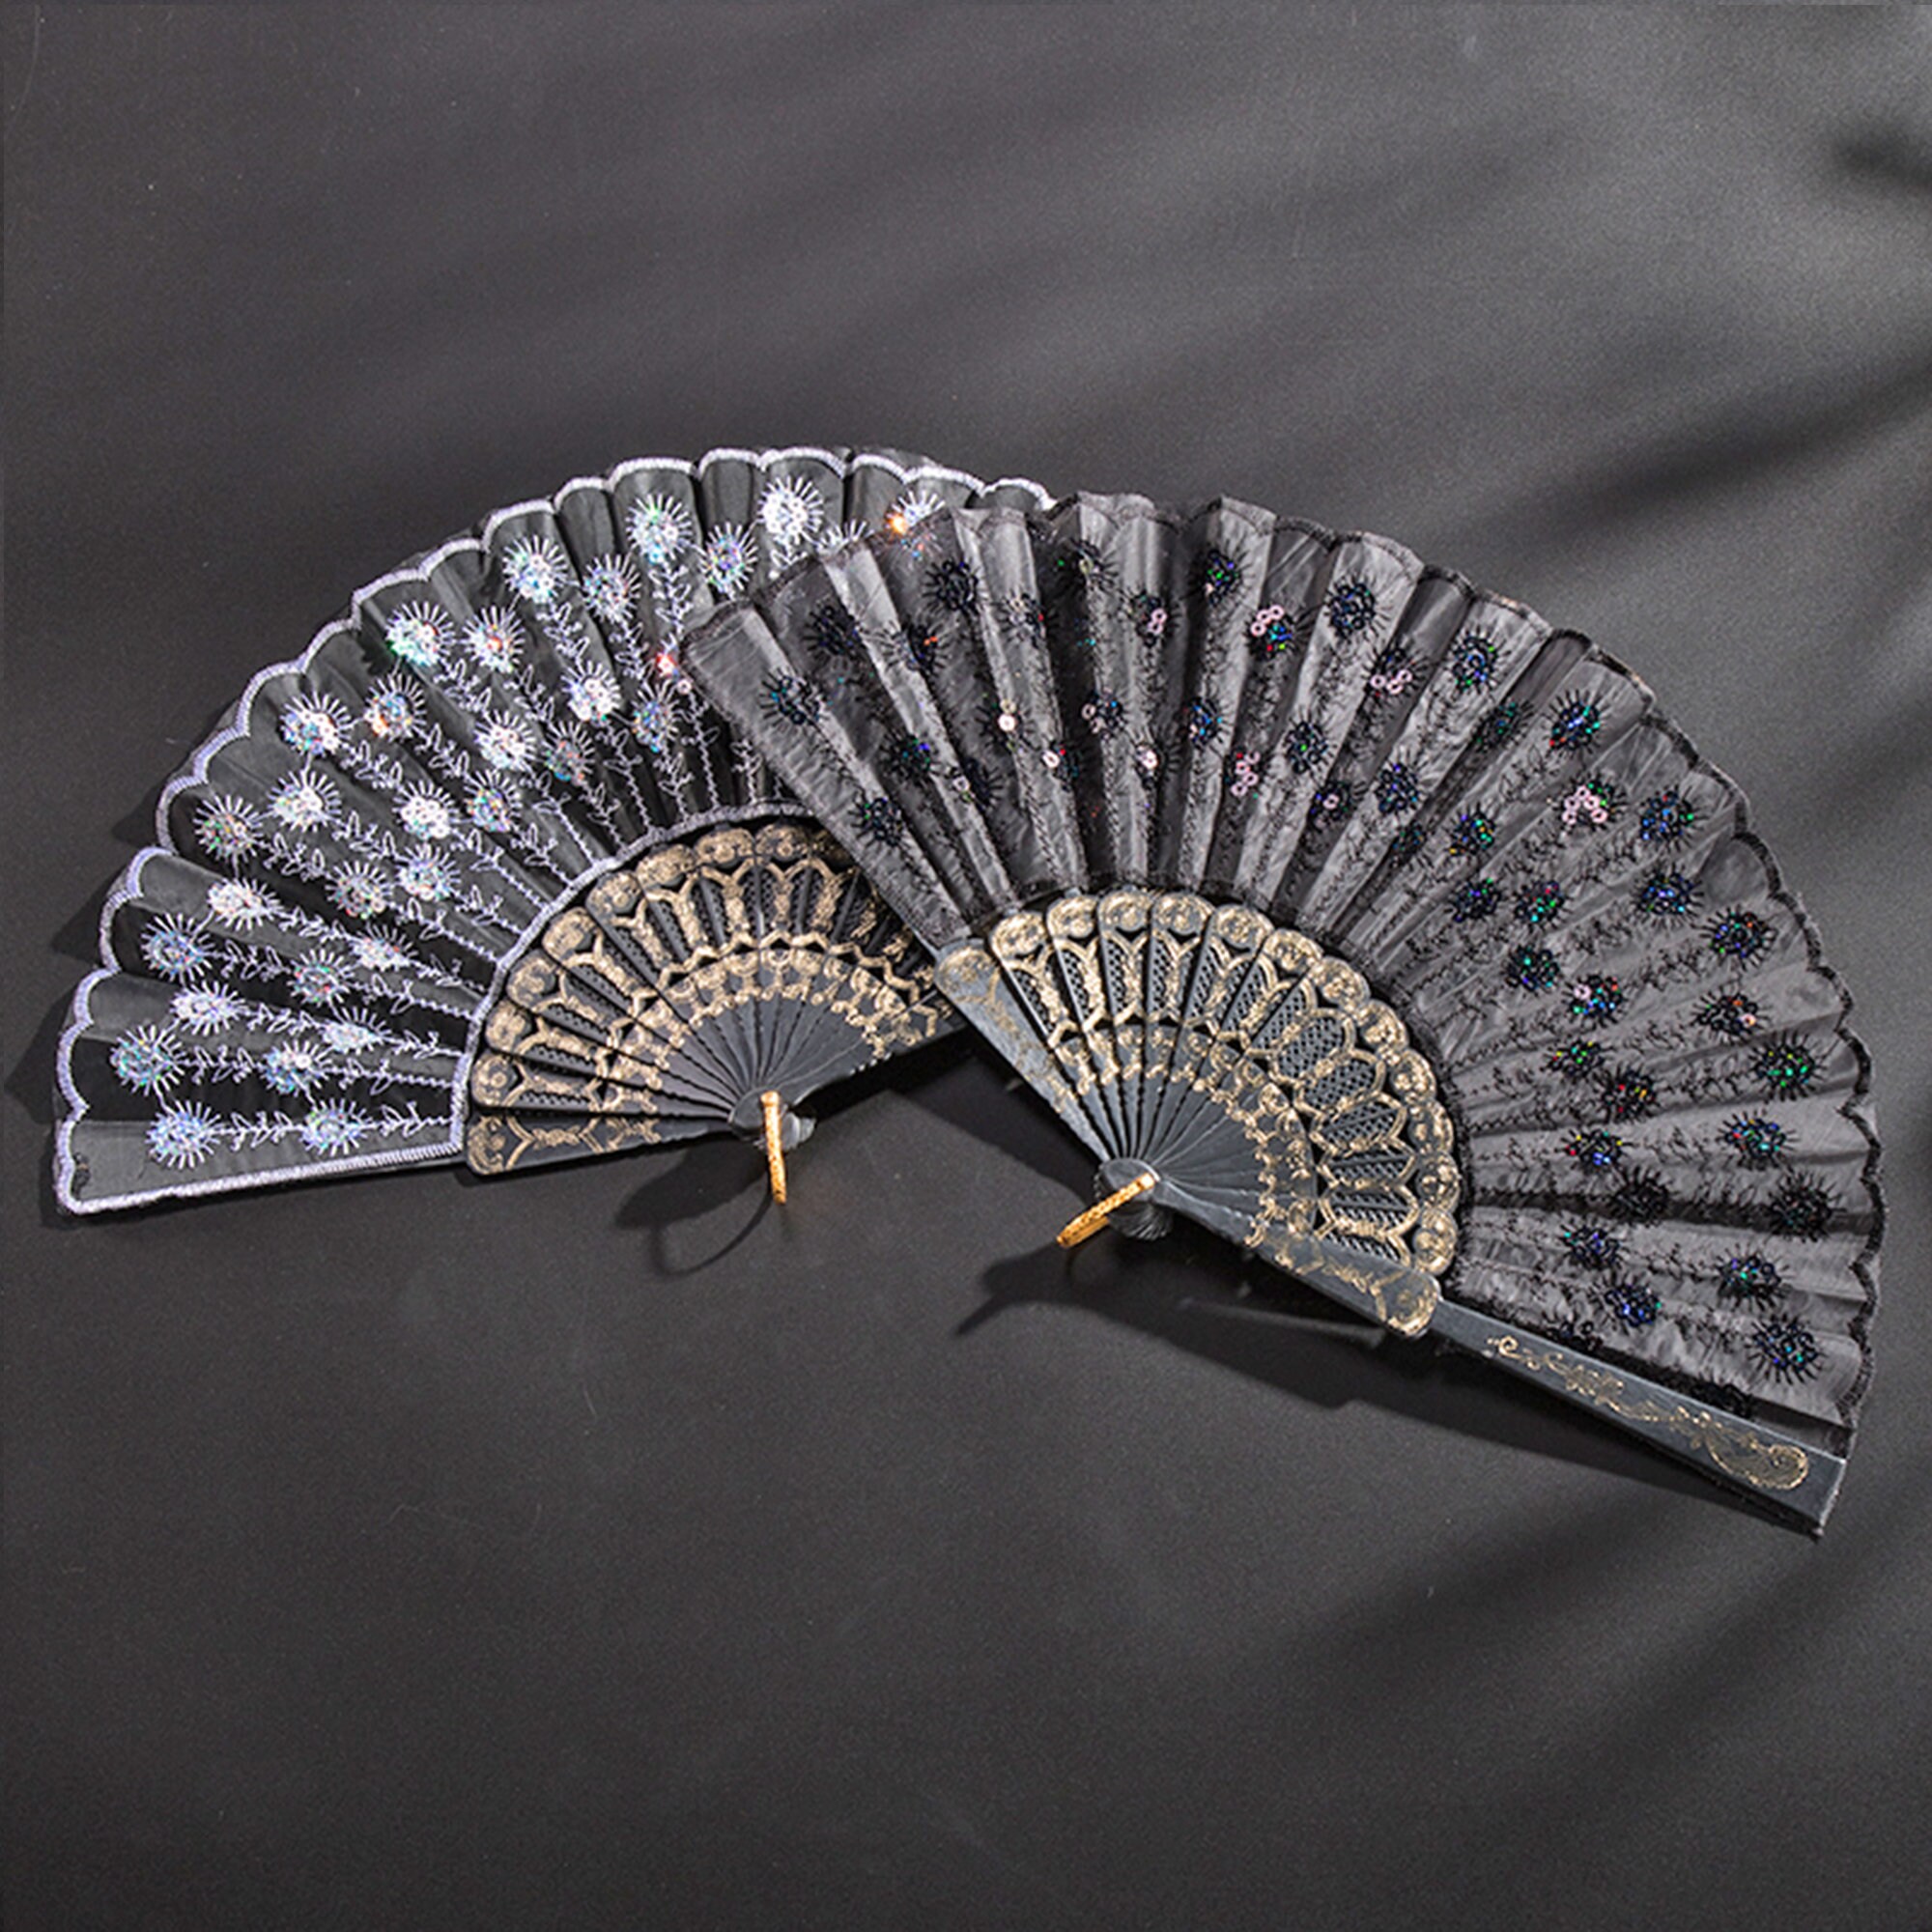 Chinese Style Sequin Fan Retro Peacock Tail Fan Dancing Lace | Etsy